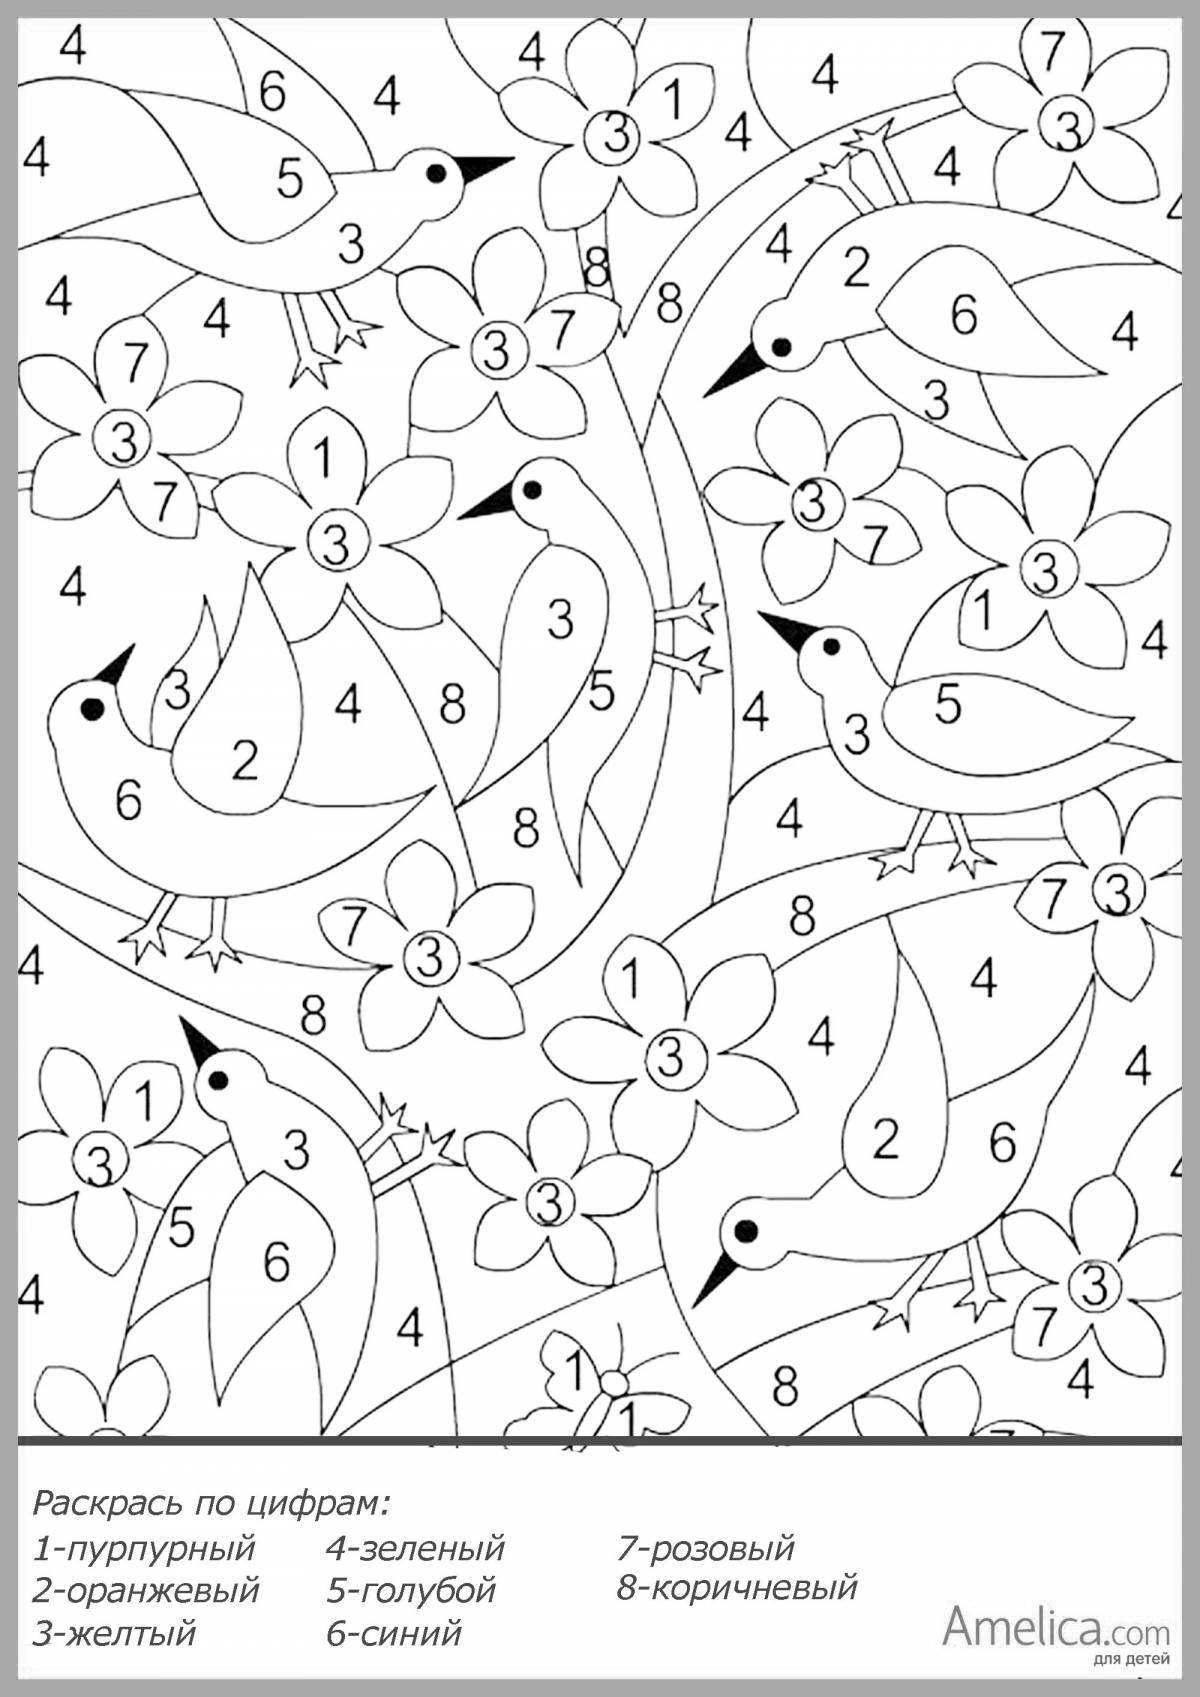 Creative coloring games for girls by numbers